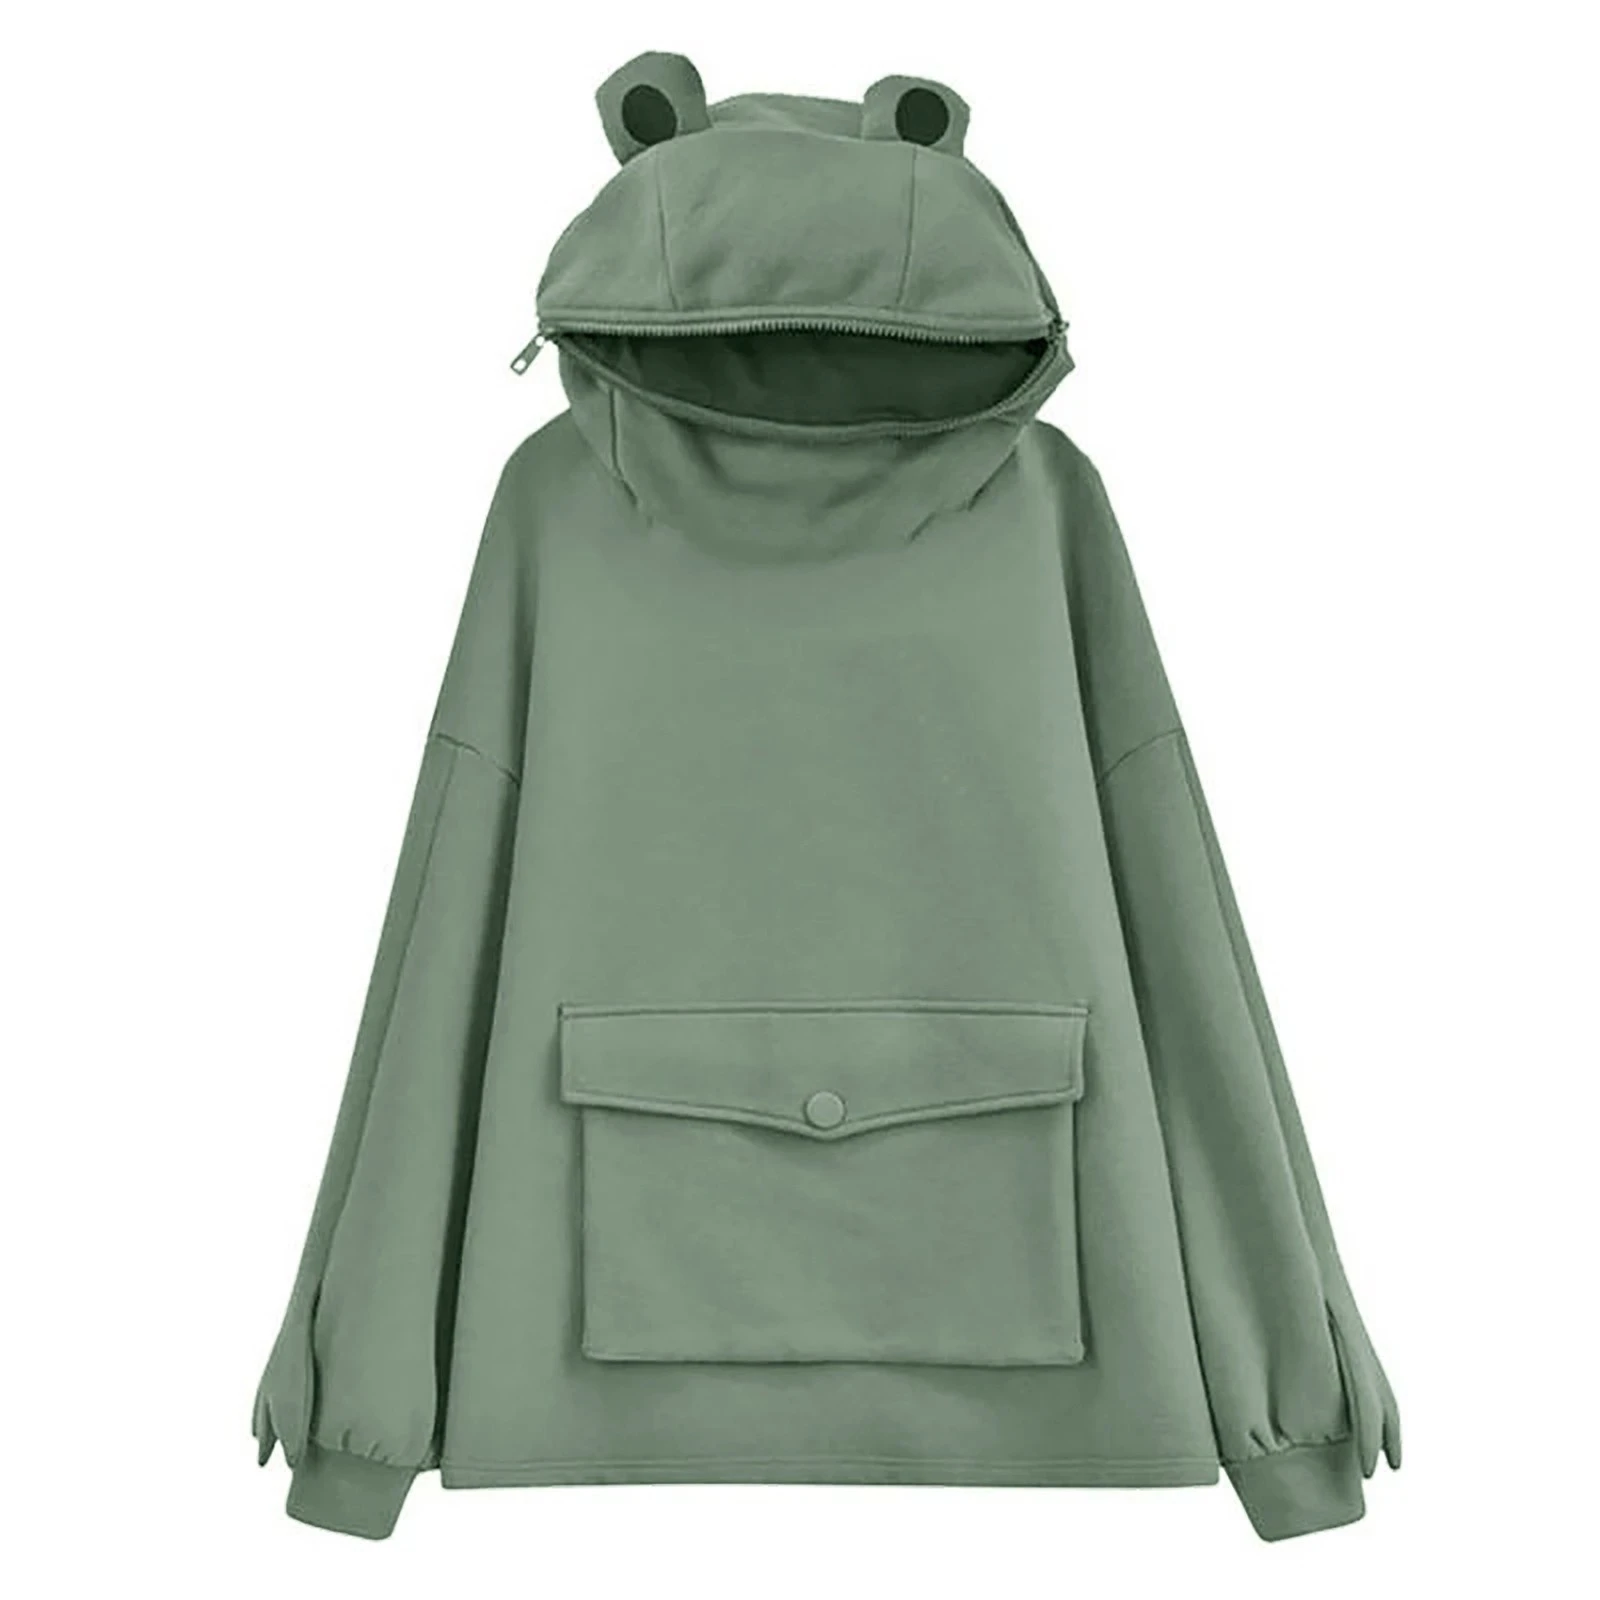 Harajuku Hoodie Lovely Frog Autumn Female Thicken Women'S Stitching Three-Dimensional Pocket Cute Pullover Hooded Sweatshirts